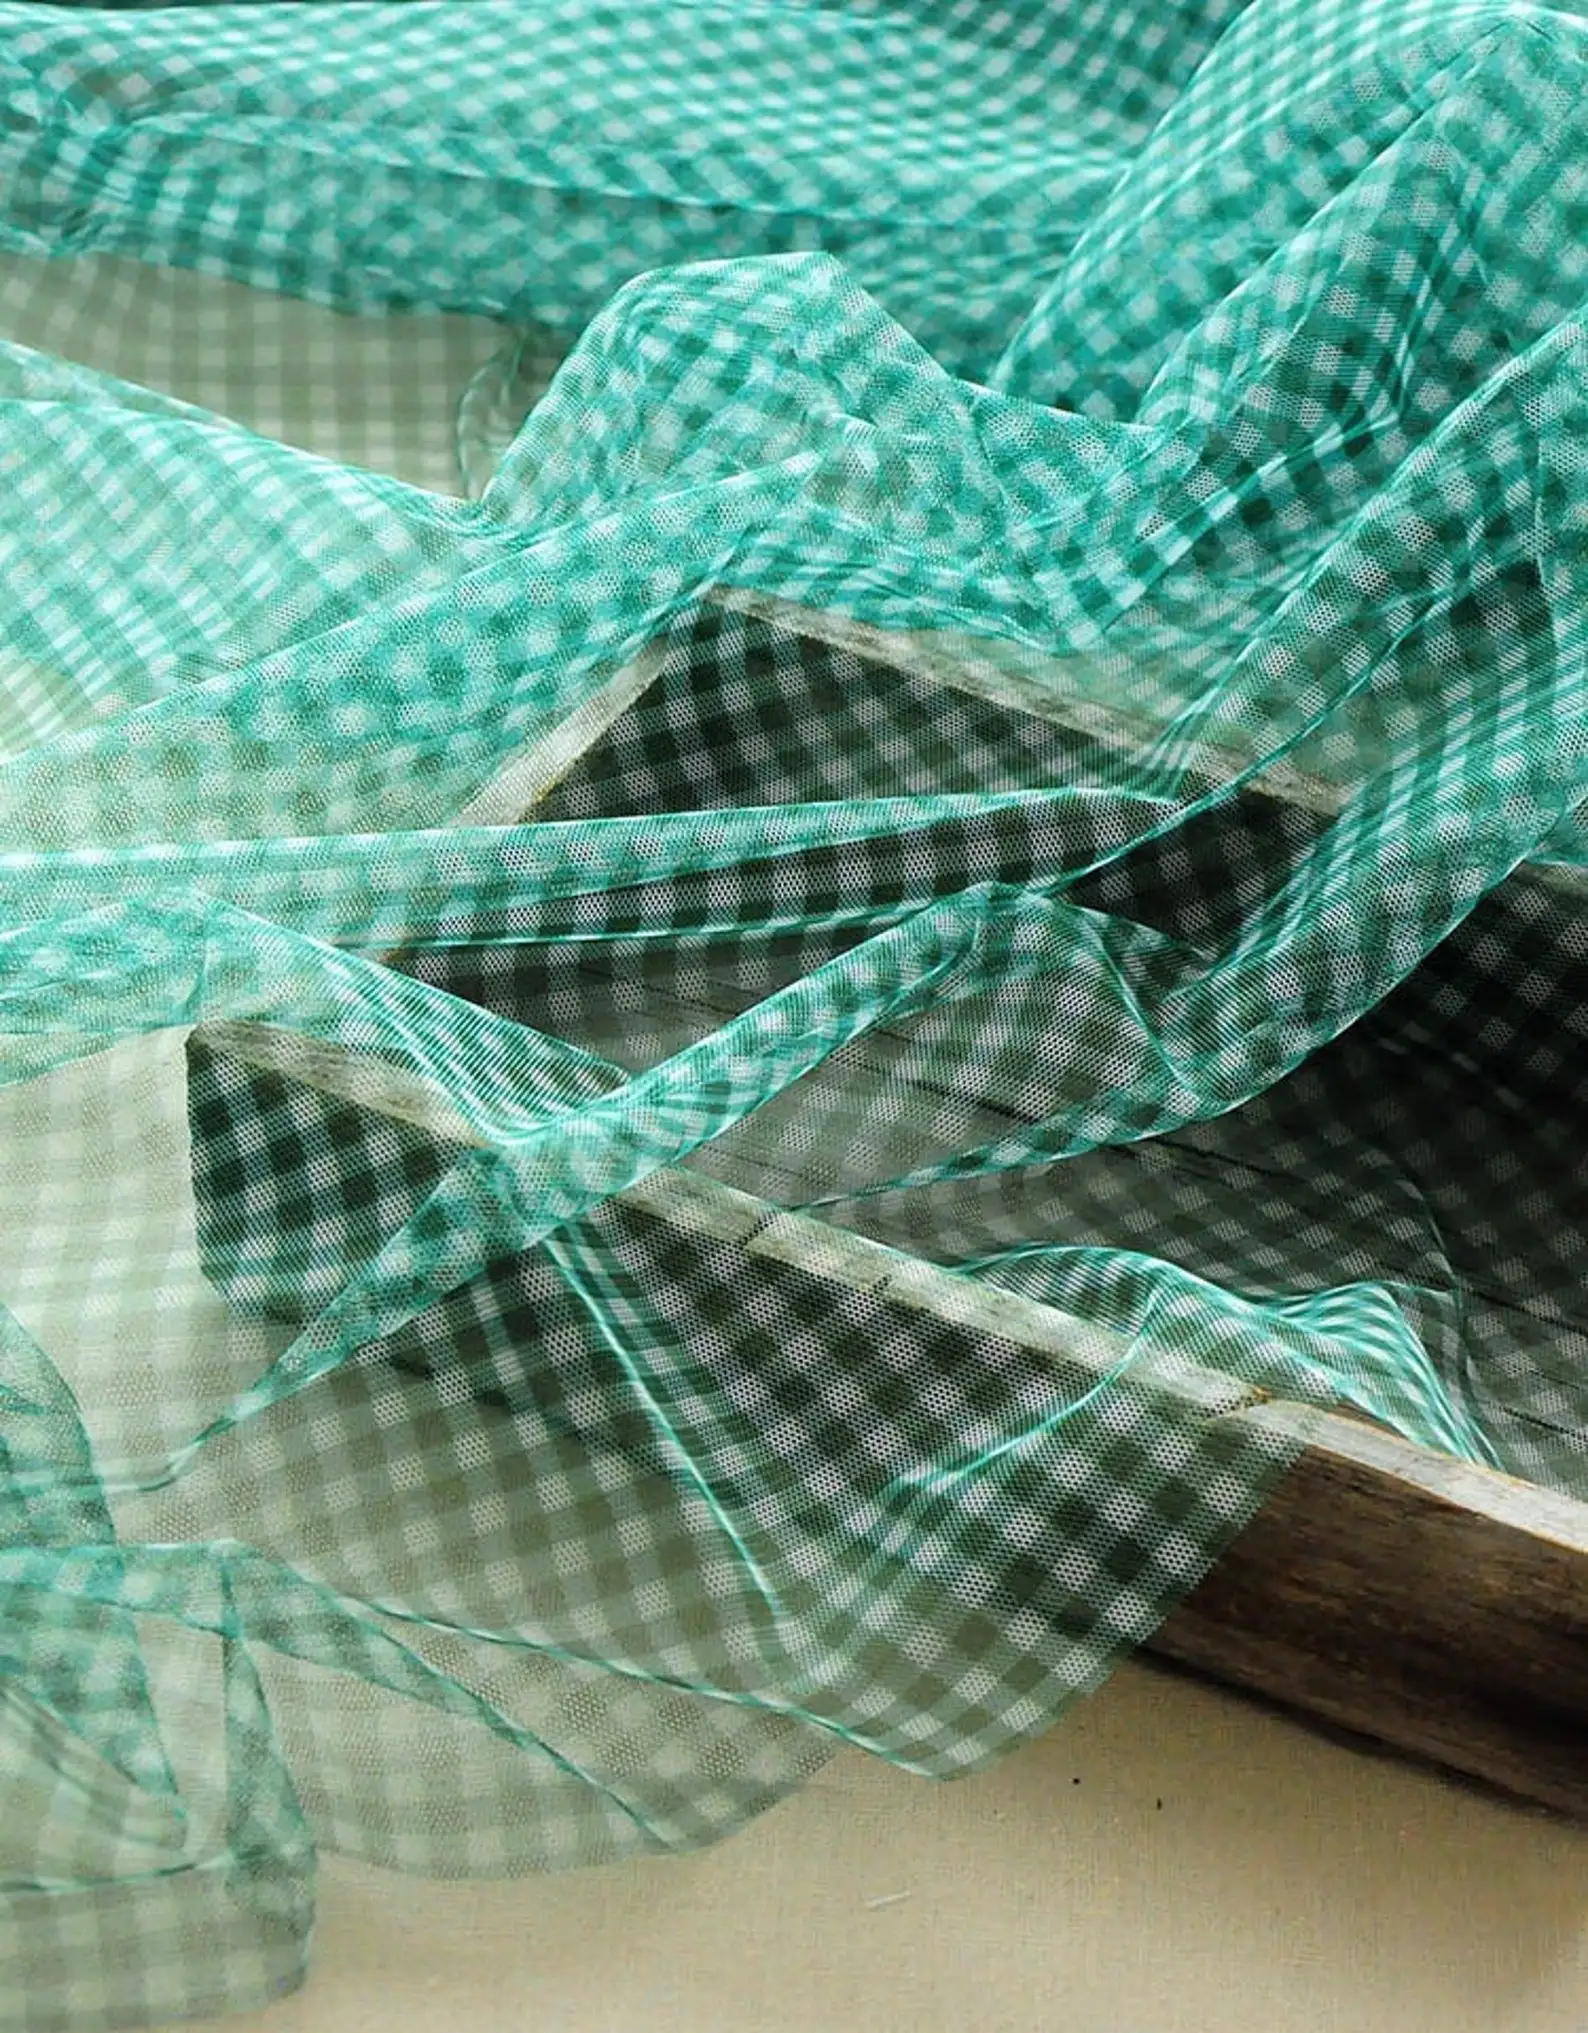 

10 Yards Green Mesh Lace Fabric with Checks Birdcage Veils Gowns Tutu Dress Party Decoration